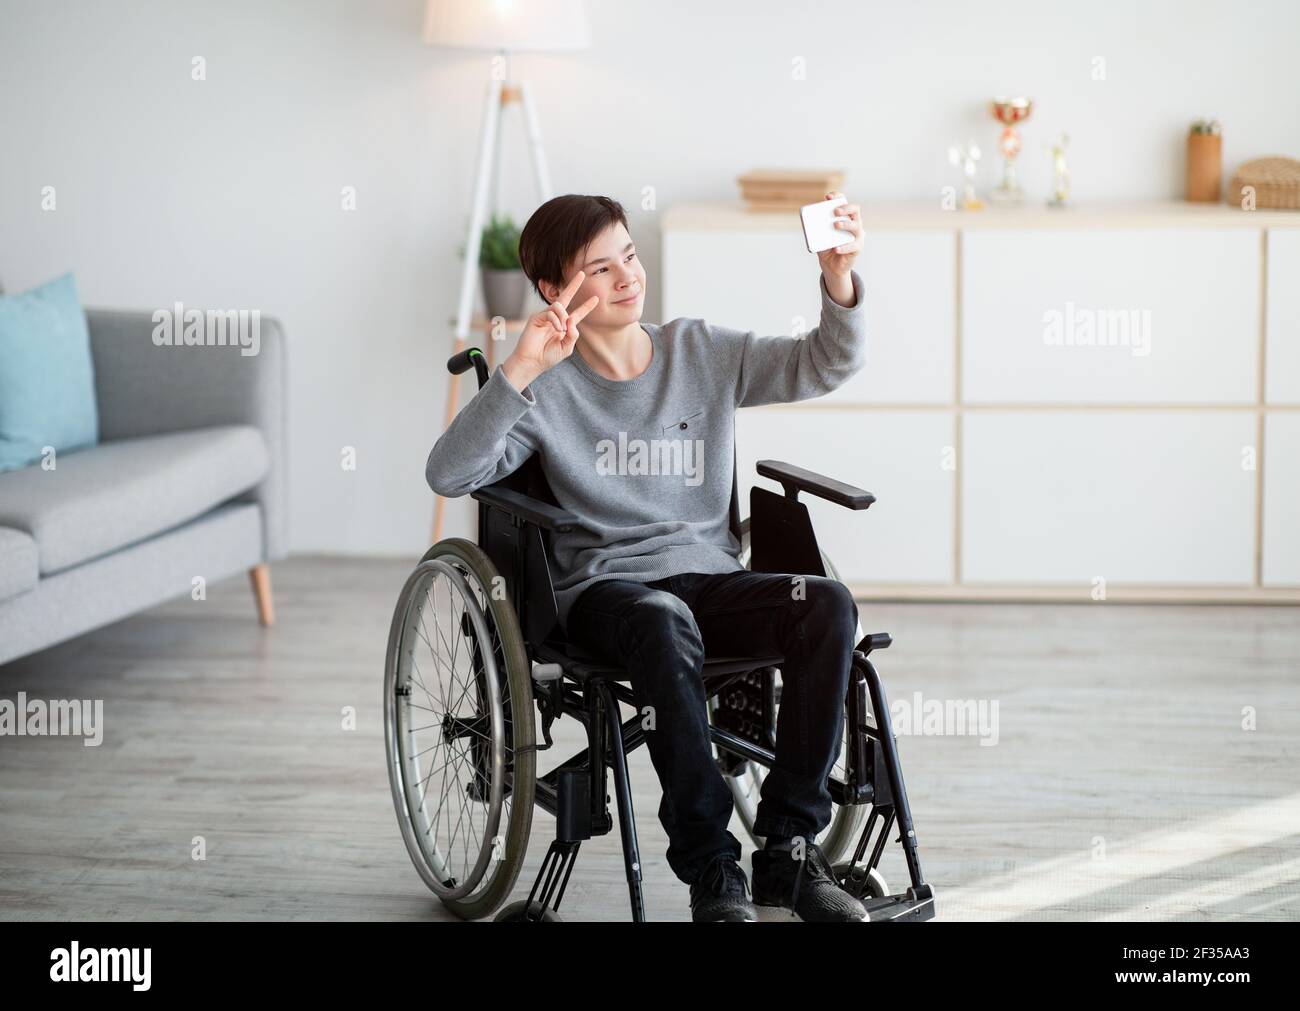 Happy disabled teenager in wheelchair taking selfie on smartphone, smiling at camera indoors Stock Photo